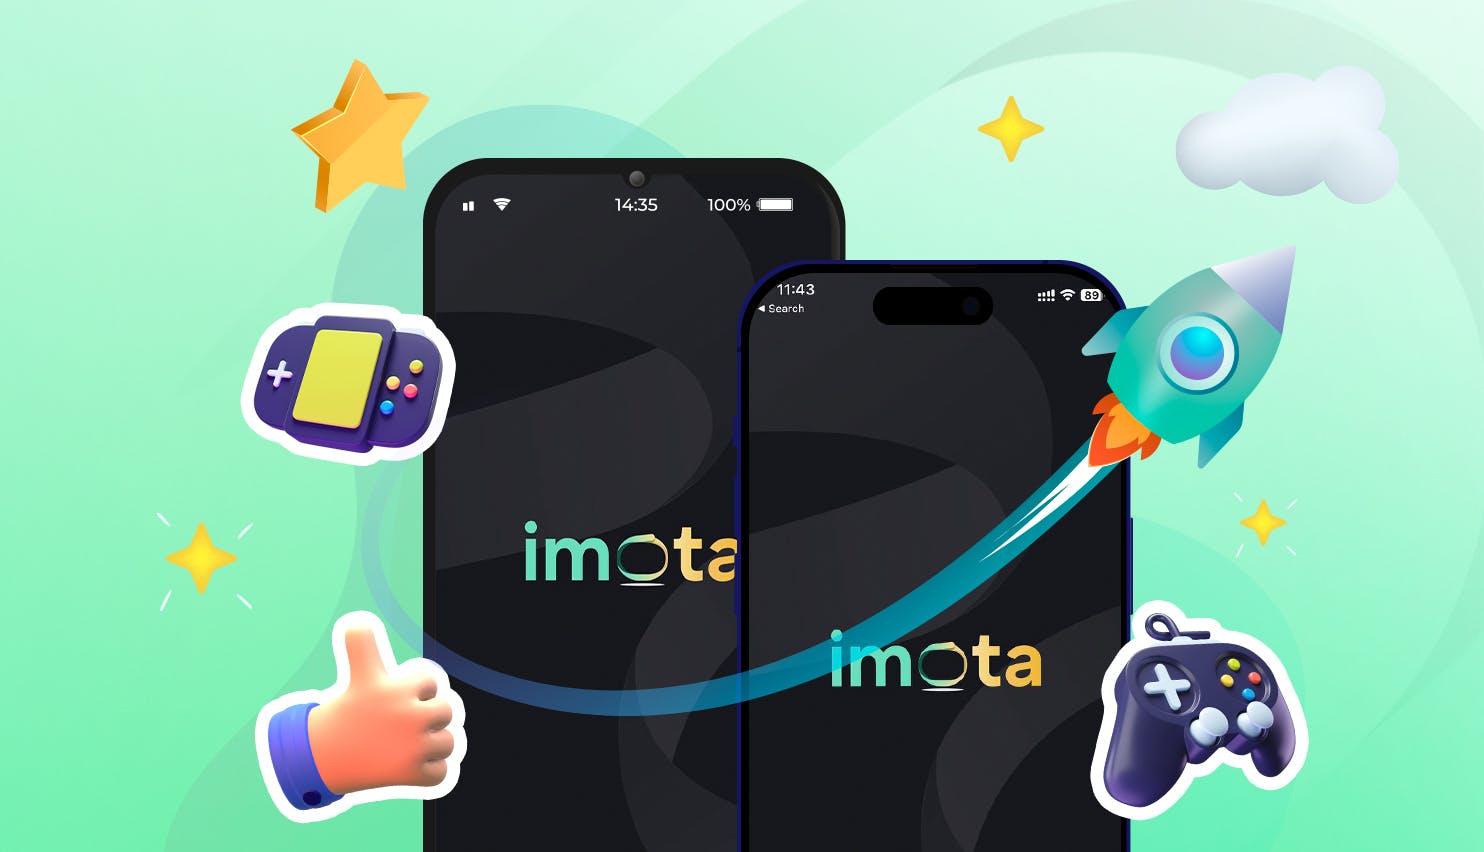 Imota new version! Explore the game features to never get bored!